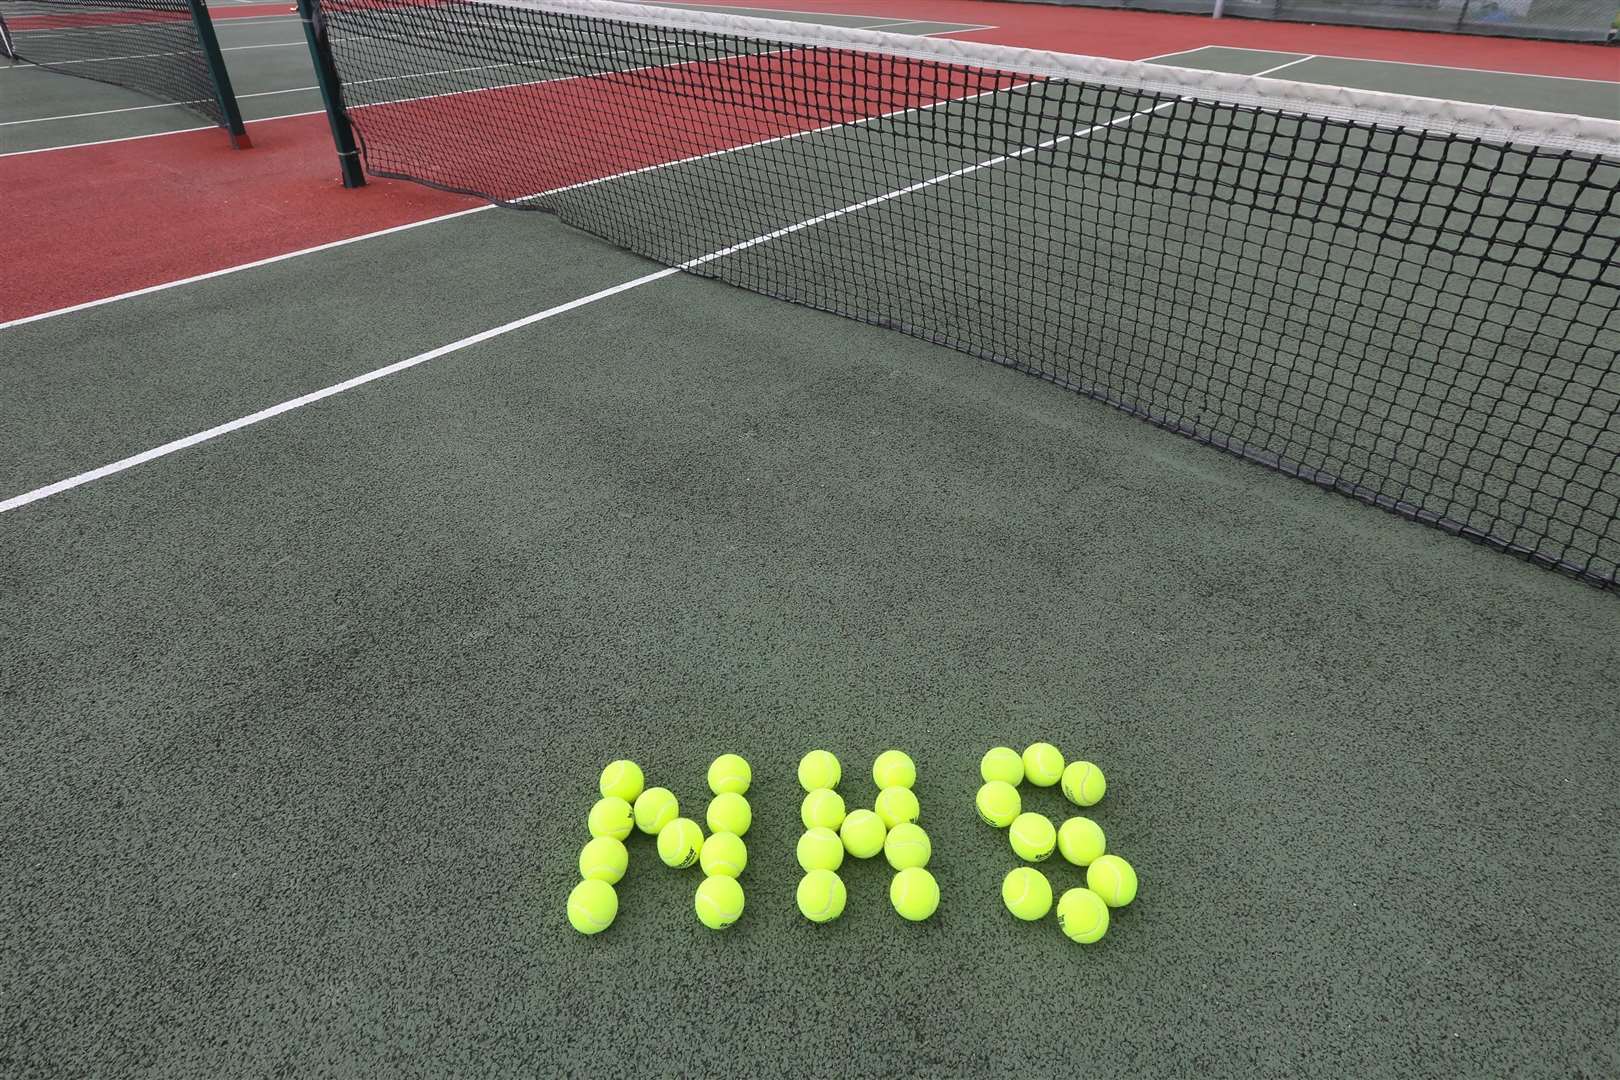 Gravesham Tennis Club is saying thank you to NHS staff and key workers with discounted lessons. Pictures: Rob Powell